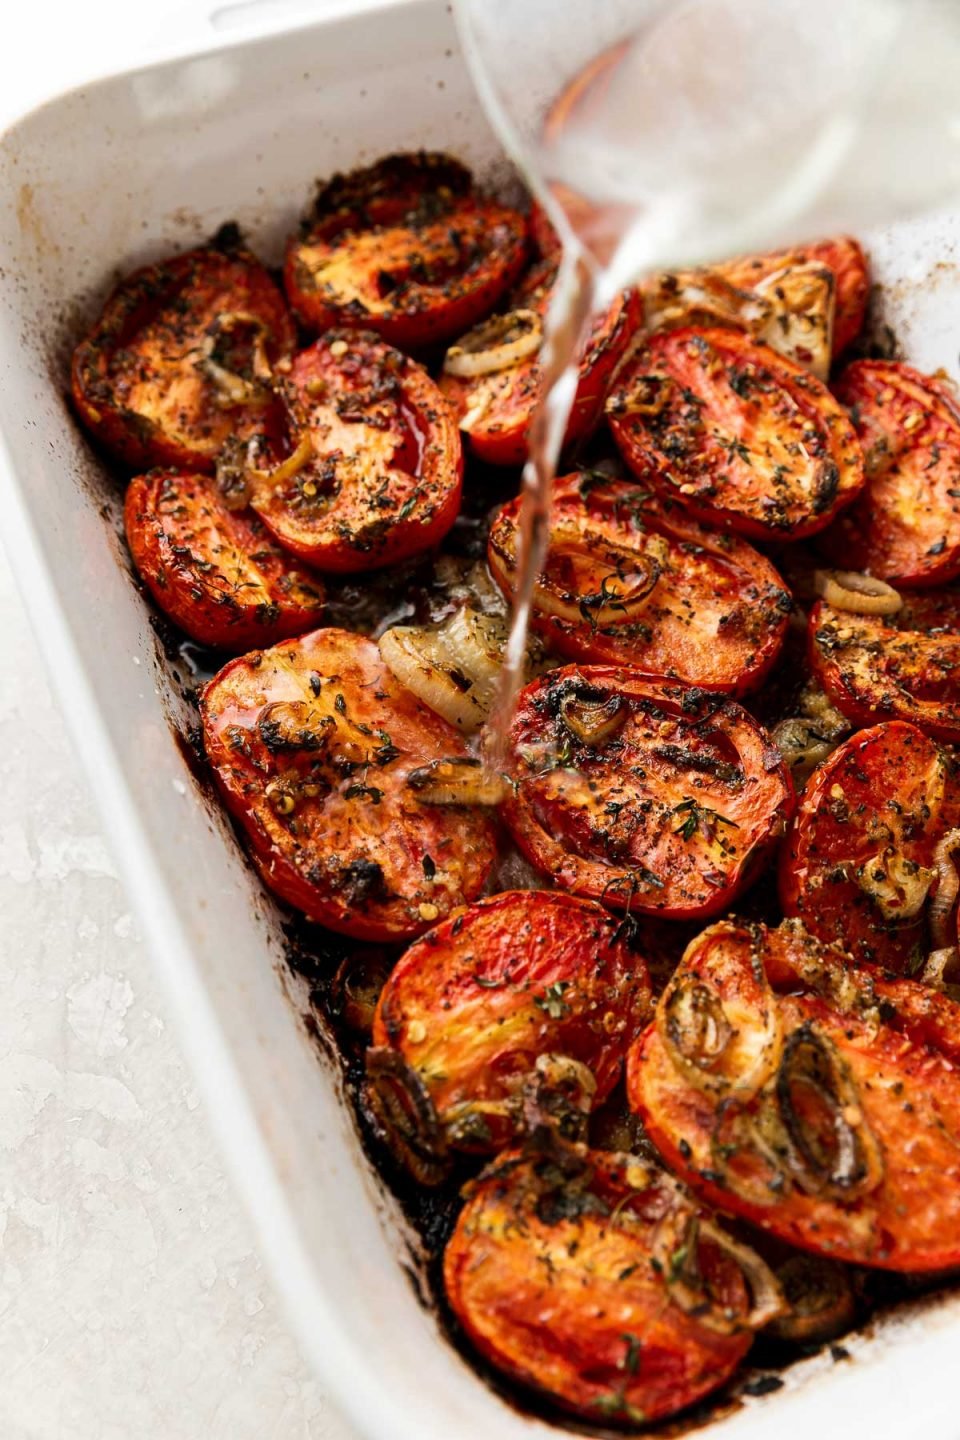 Oven roasted roma tomatoes, shallots, & garlic in a white Staub baking dish. The dish sits atop a creamy white surface. Vermouth is being poured from a clear glass measuring to deglaze the bottom of the baking dish to make roasted tomato basil soup.